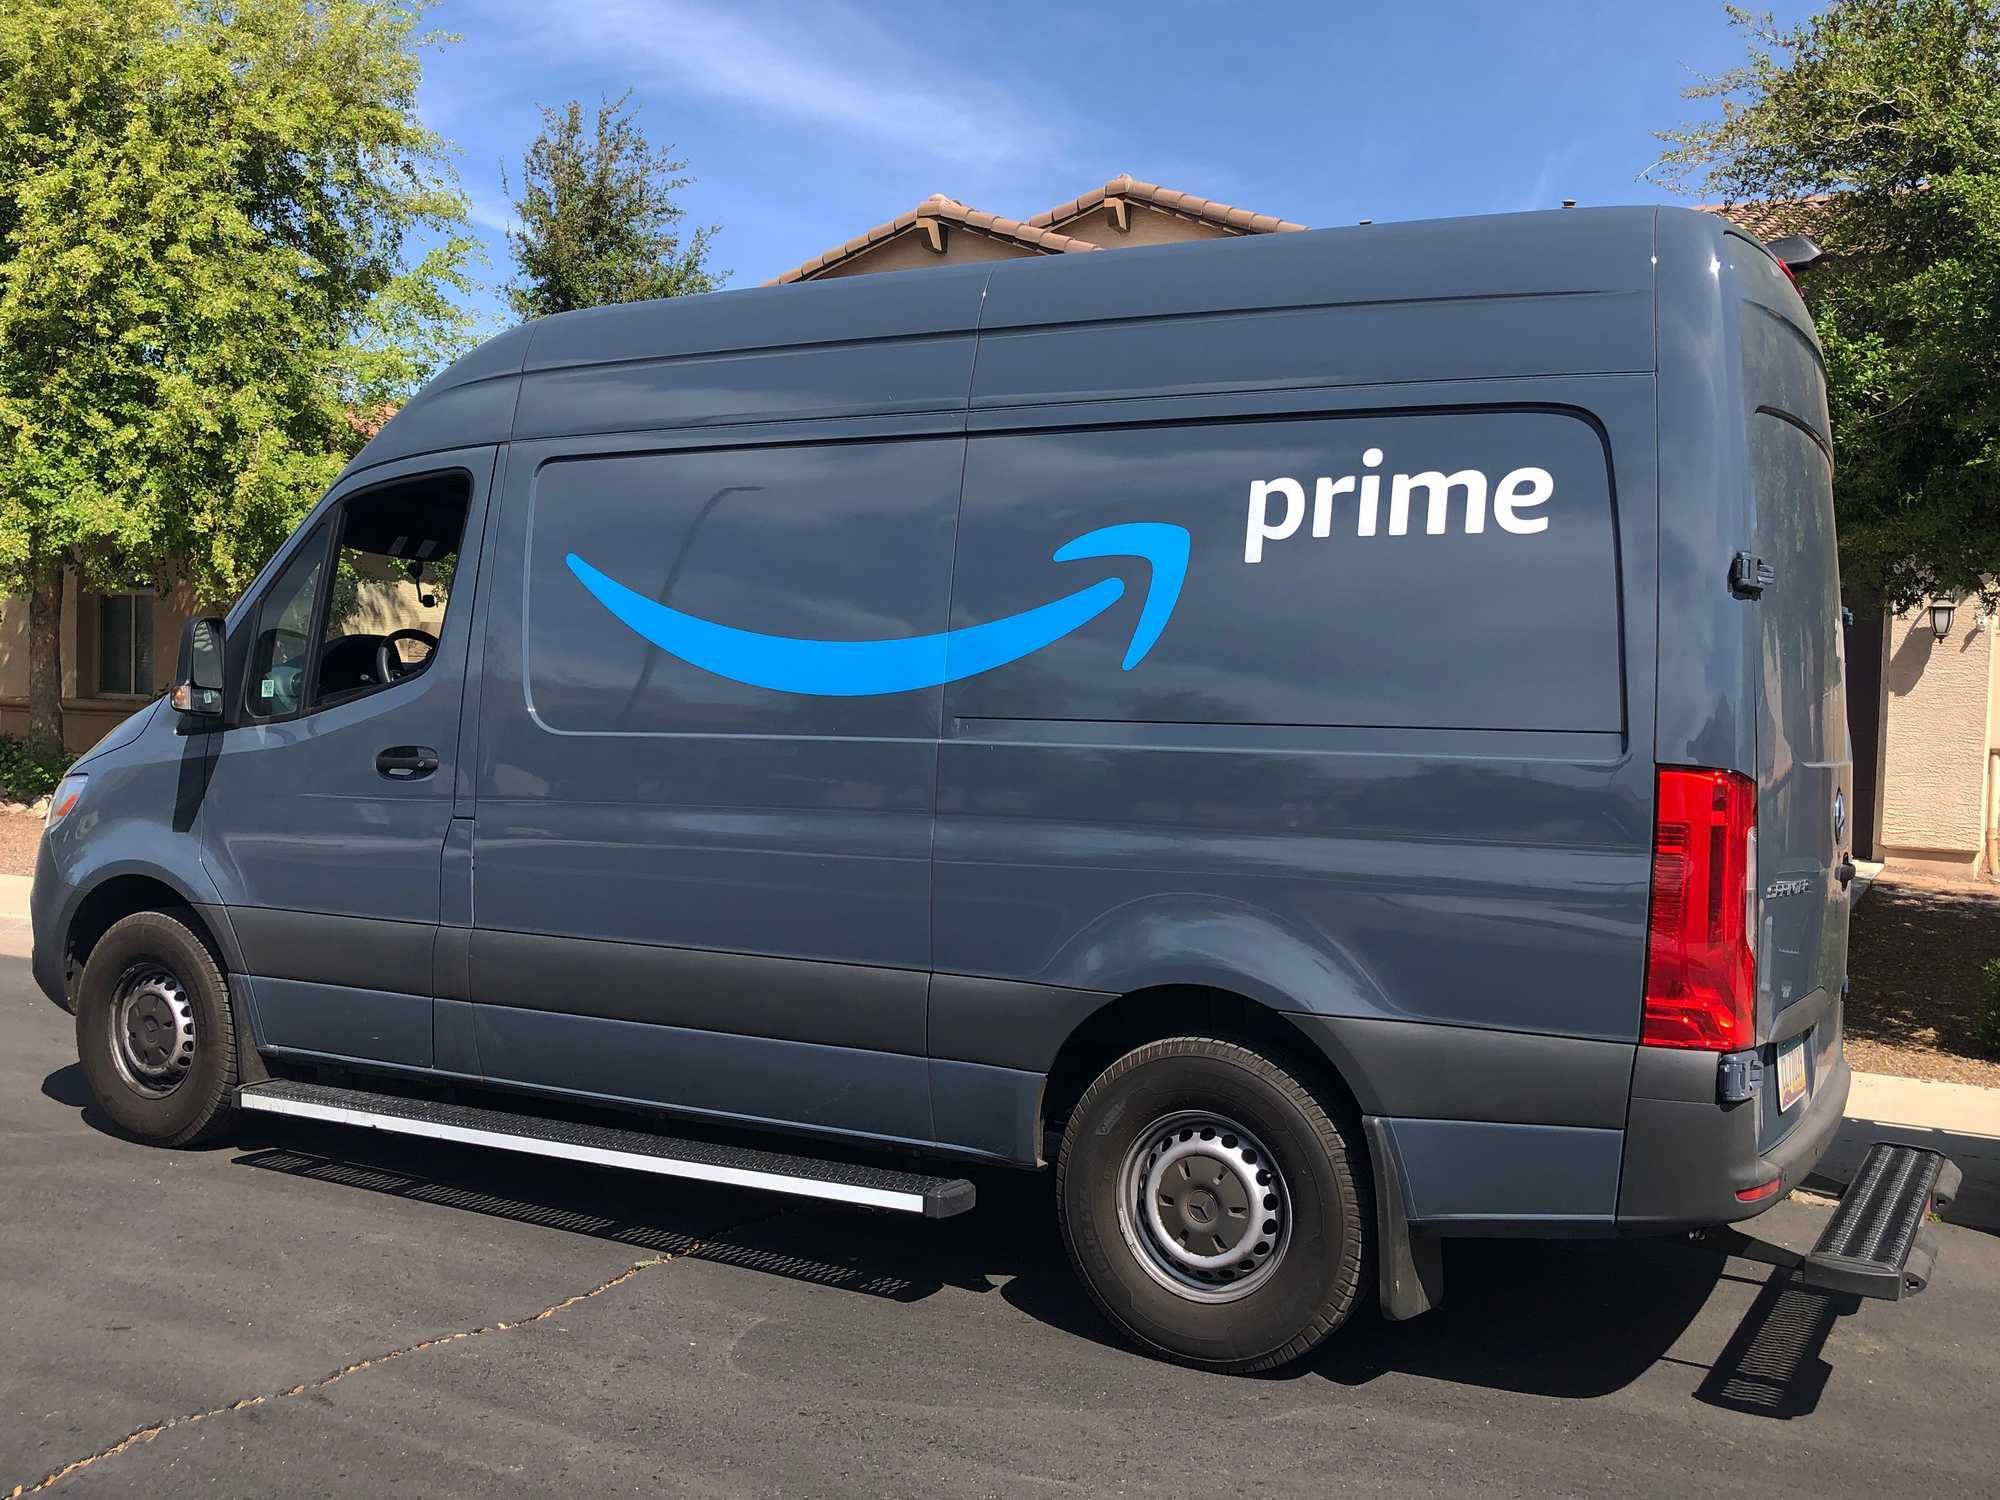 Amazon delivery truck regarding the Amazin delivery driver class action lawsuit filed